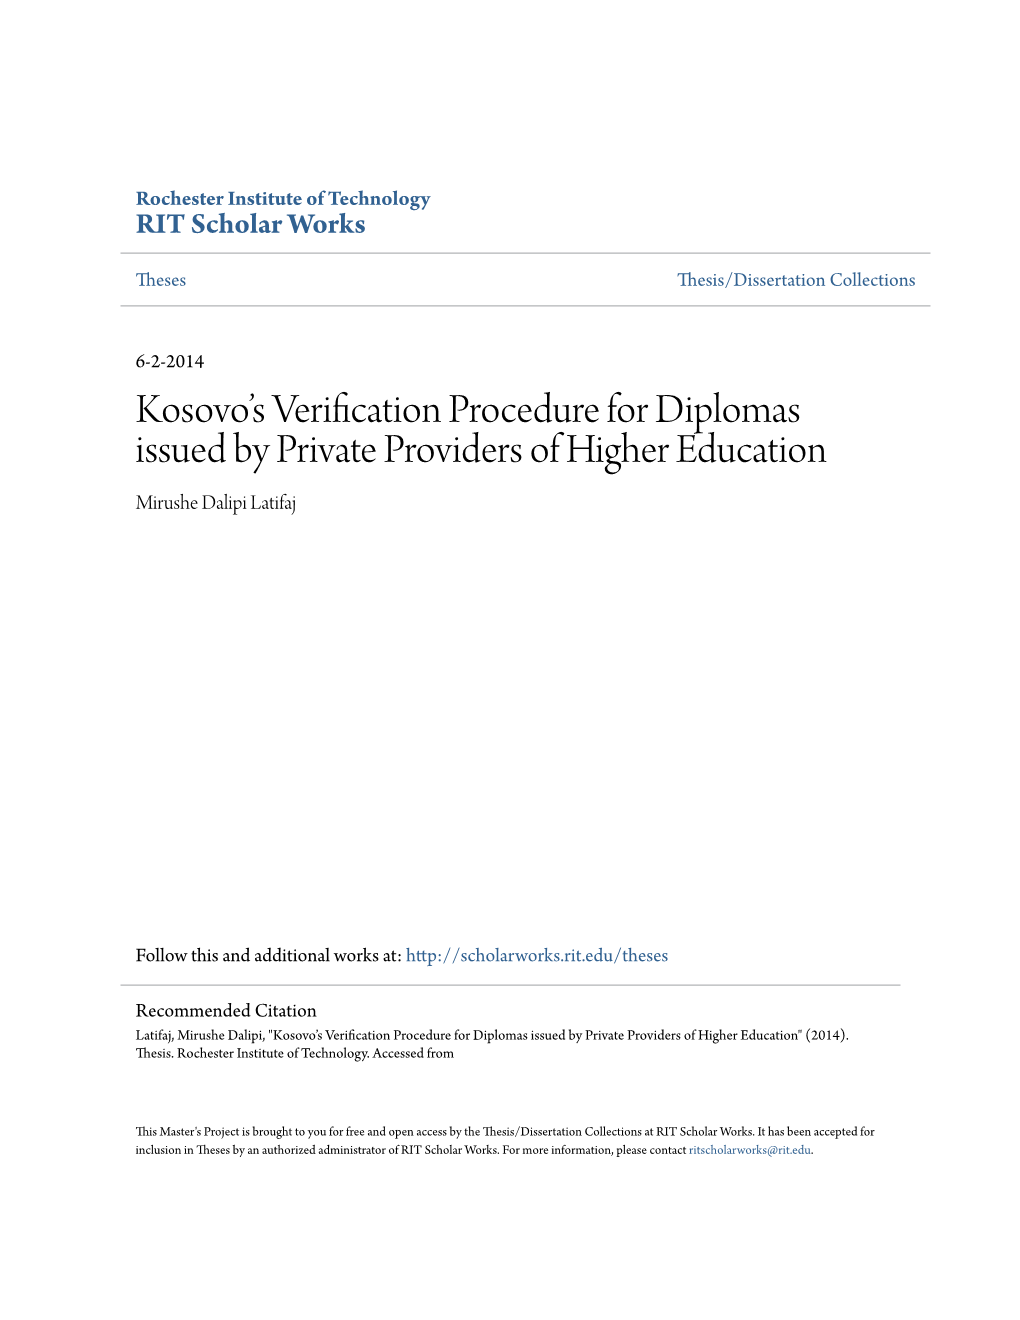 Kosovo's Verification Procedure for Diplomas Issued by Private